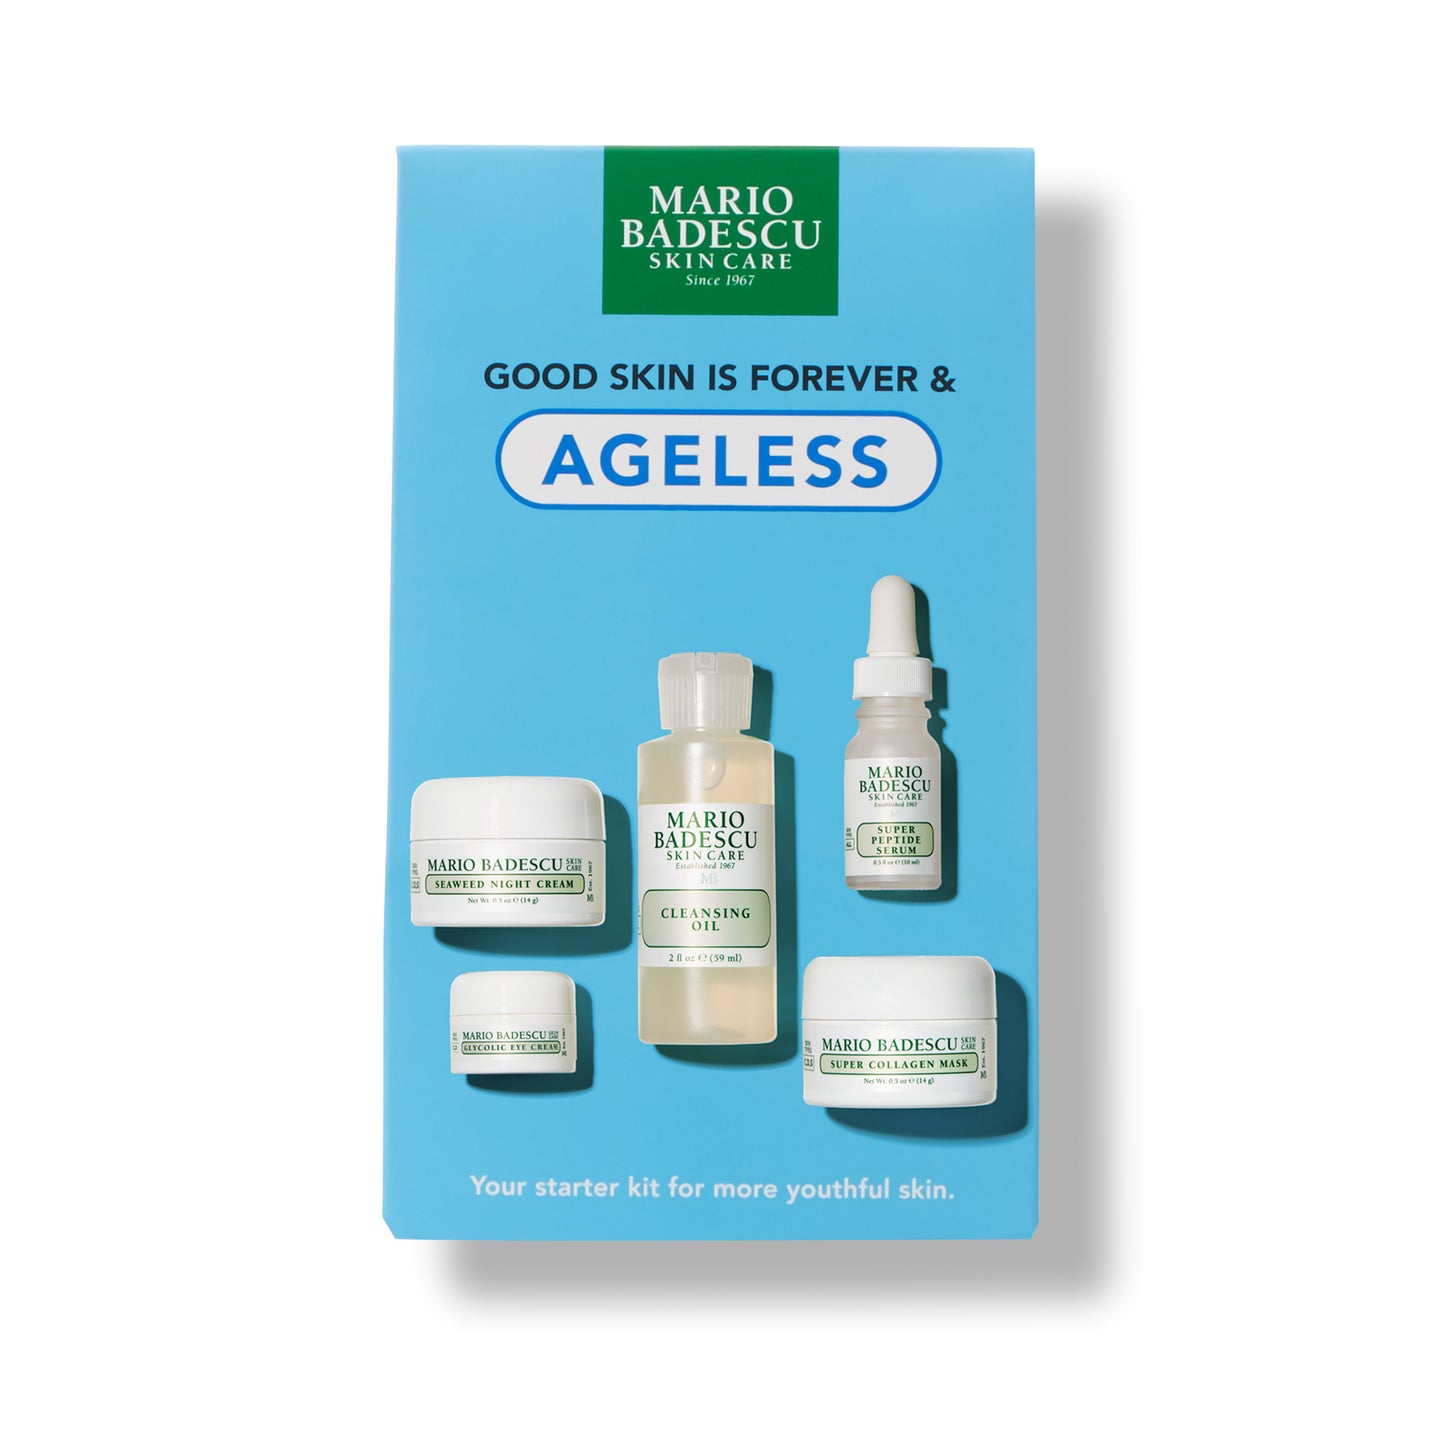 Mario Badescu Good Skin Is Forever & Ageless